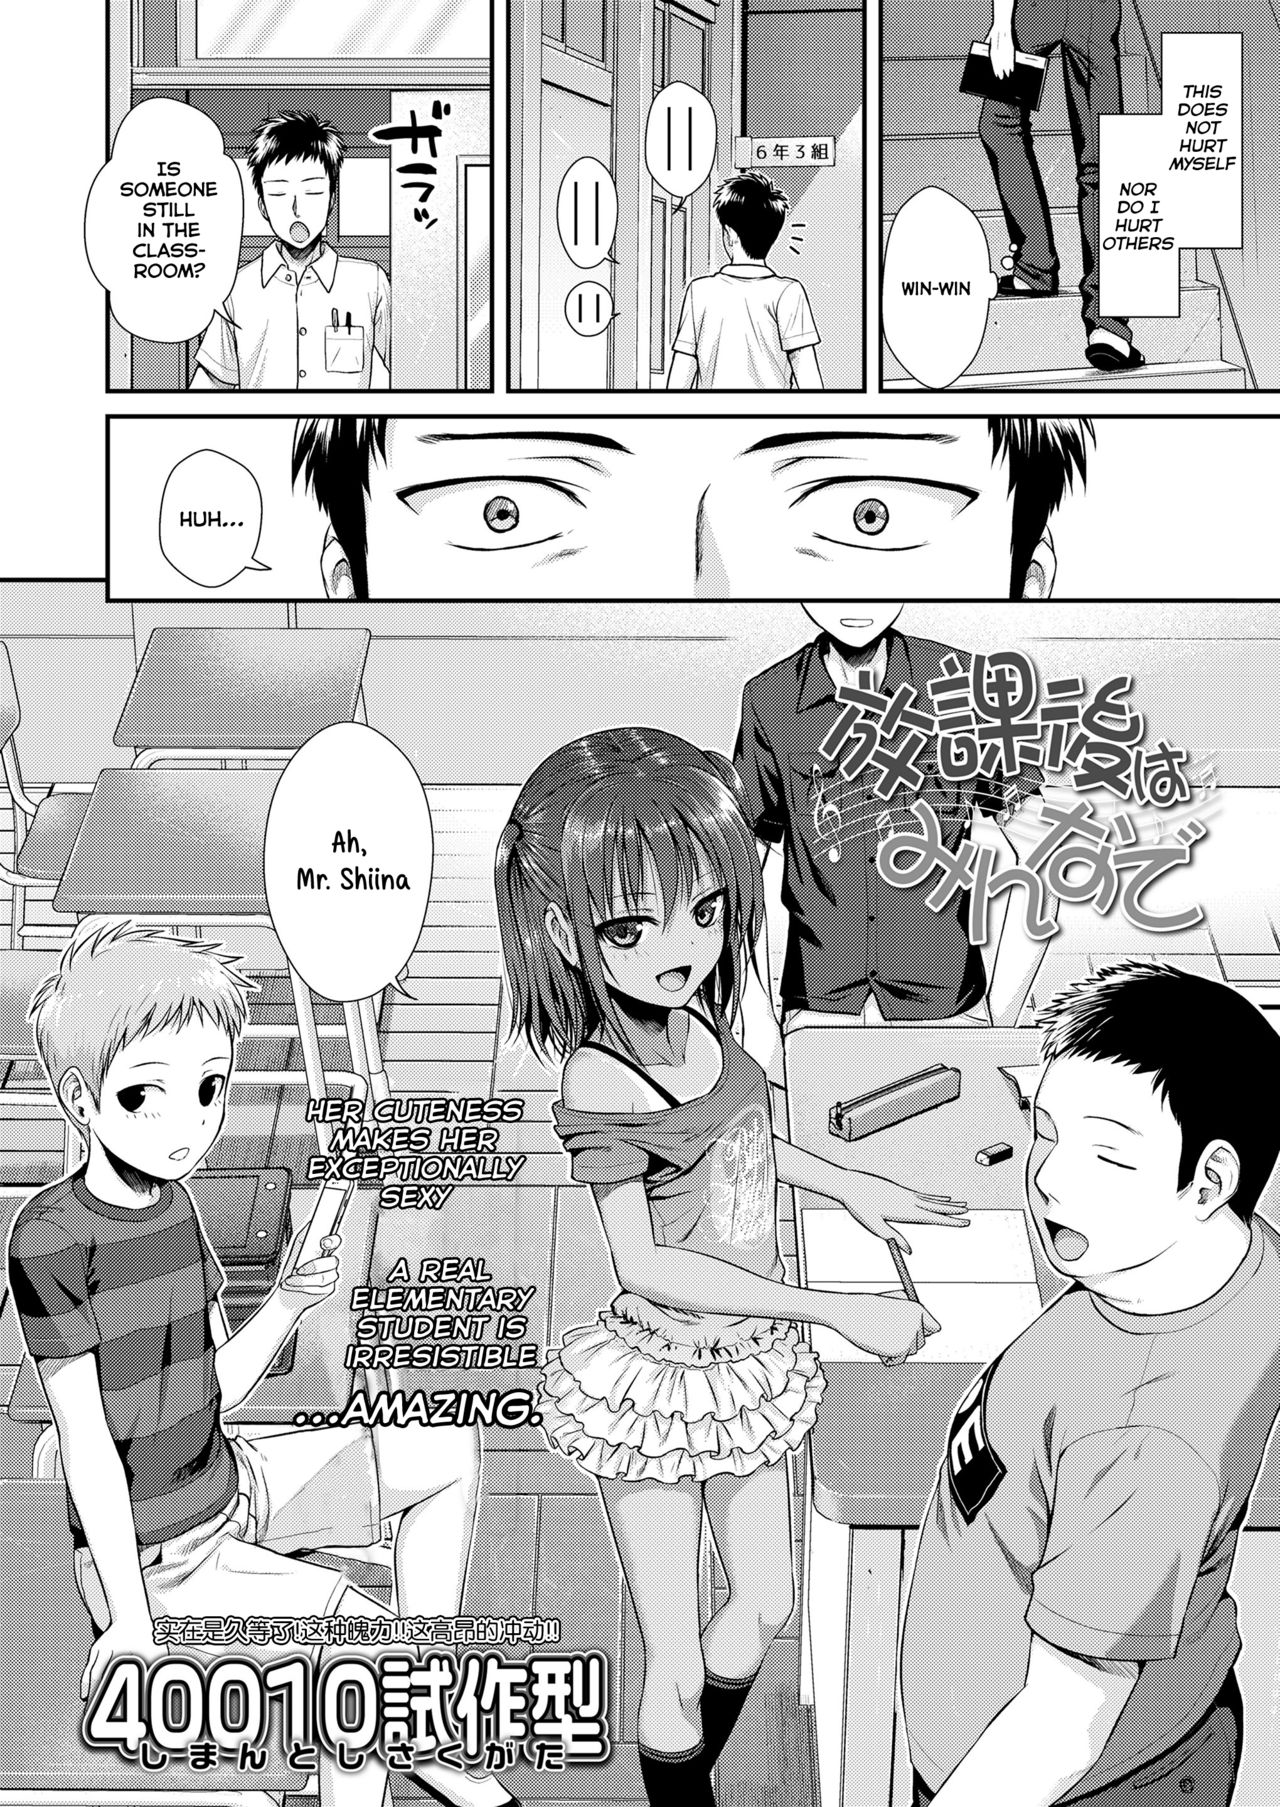 Prototype Lolita Vol.1 Chapter 1: Together With Everyone After School - Picture 2